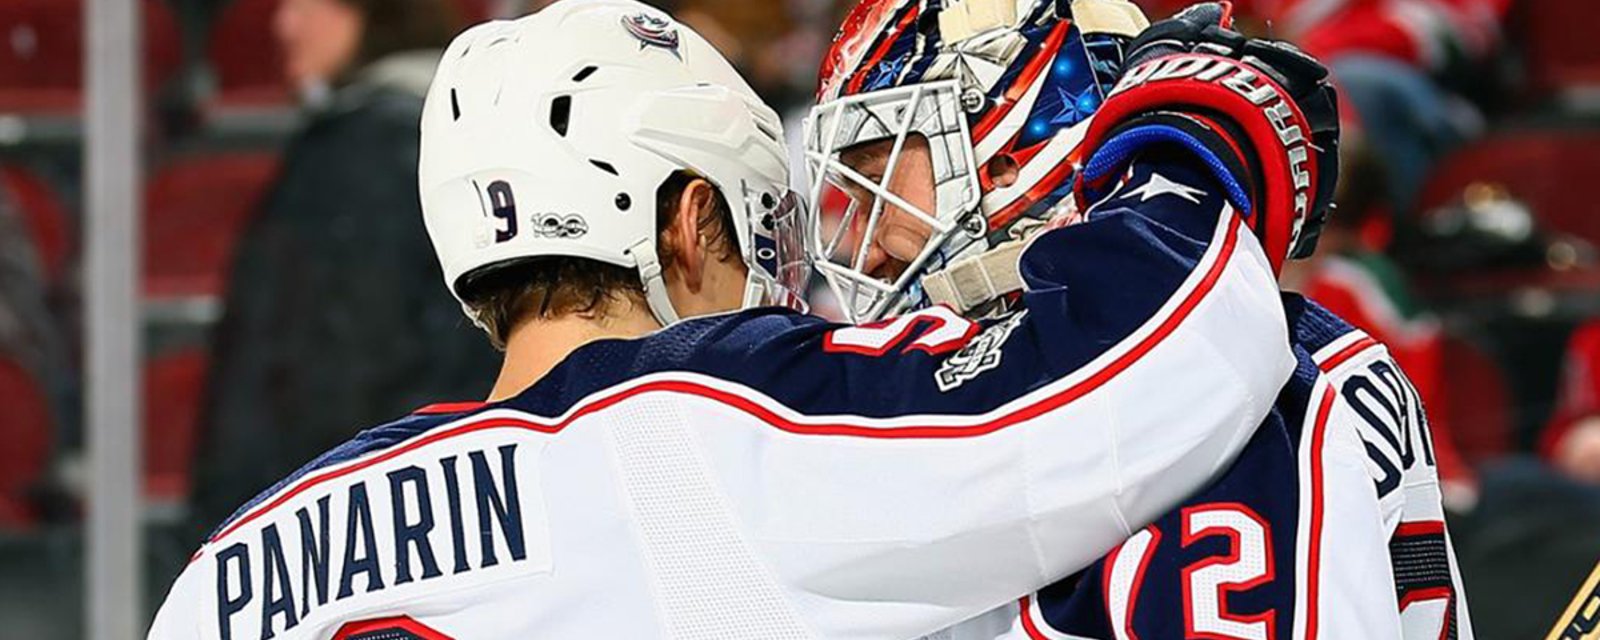 Blue Jackets teammates get personal with pending UFAs Panarin and Bobrovsky